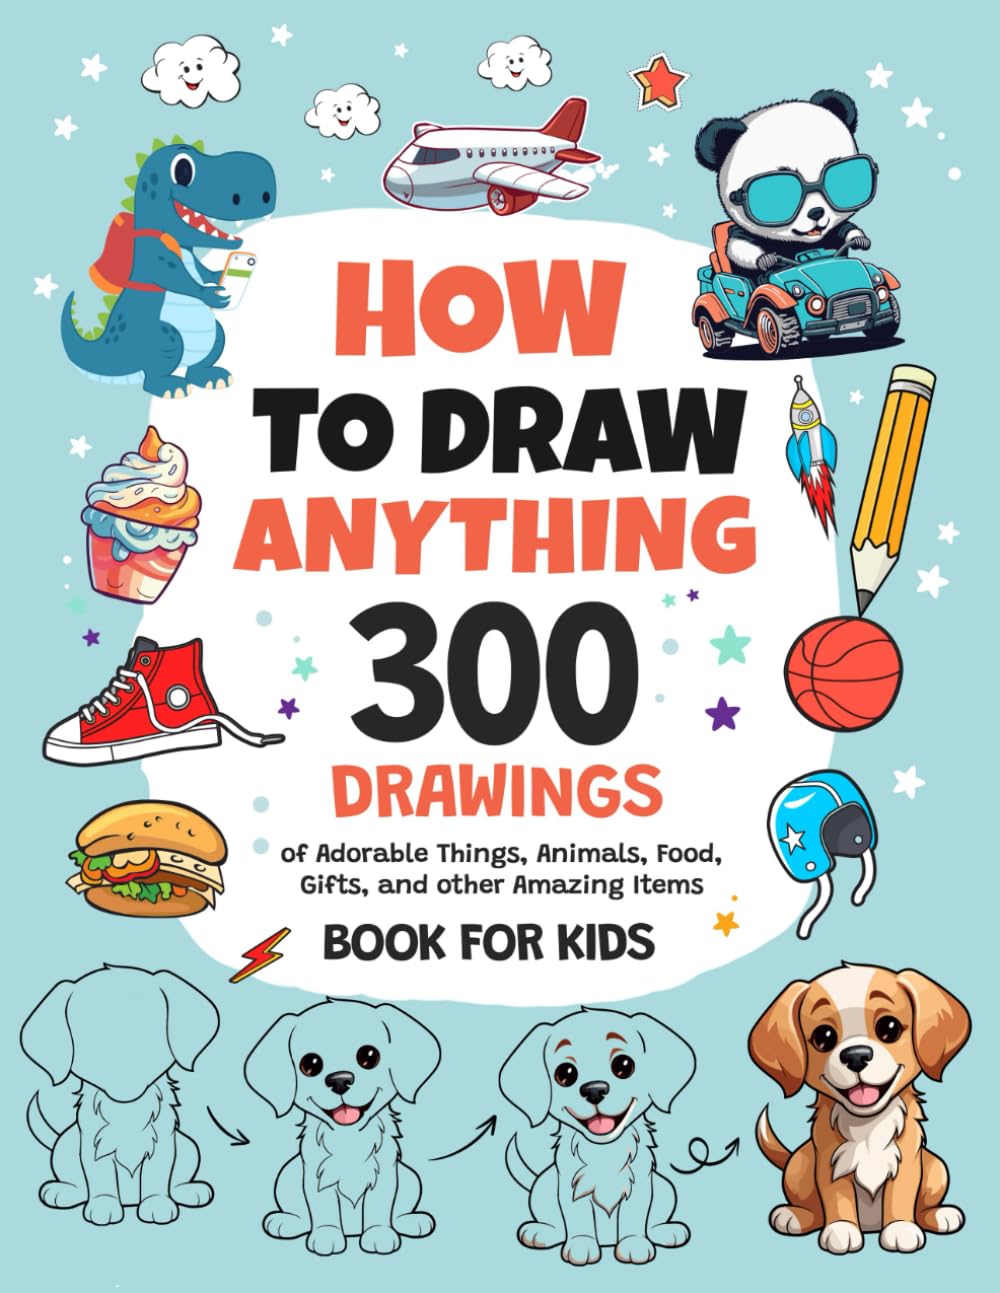 How To Draw Anything: 300 Drawings of Adorable Things, Animals, Food, Gifts, and other Amazing Items | Book For Kids